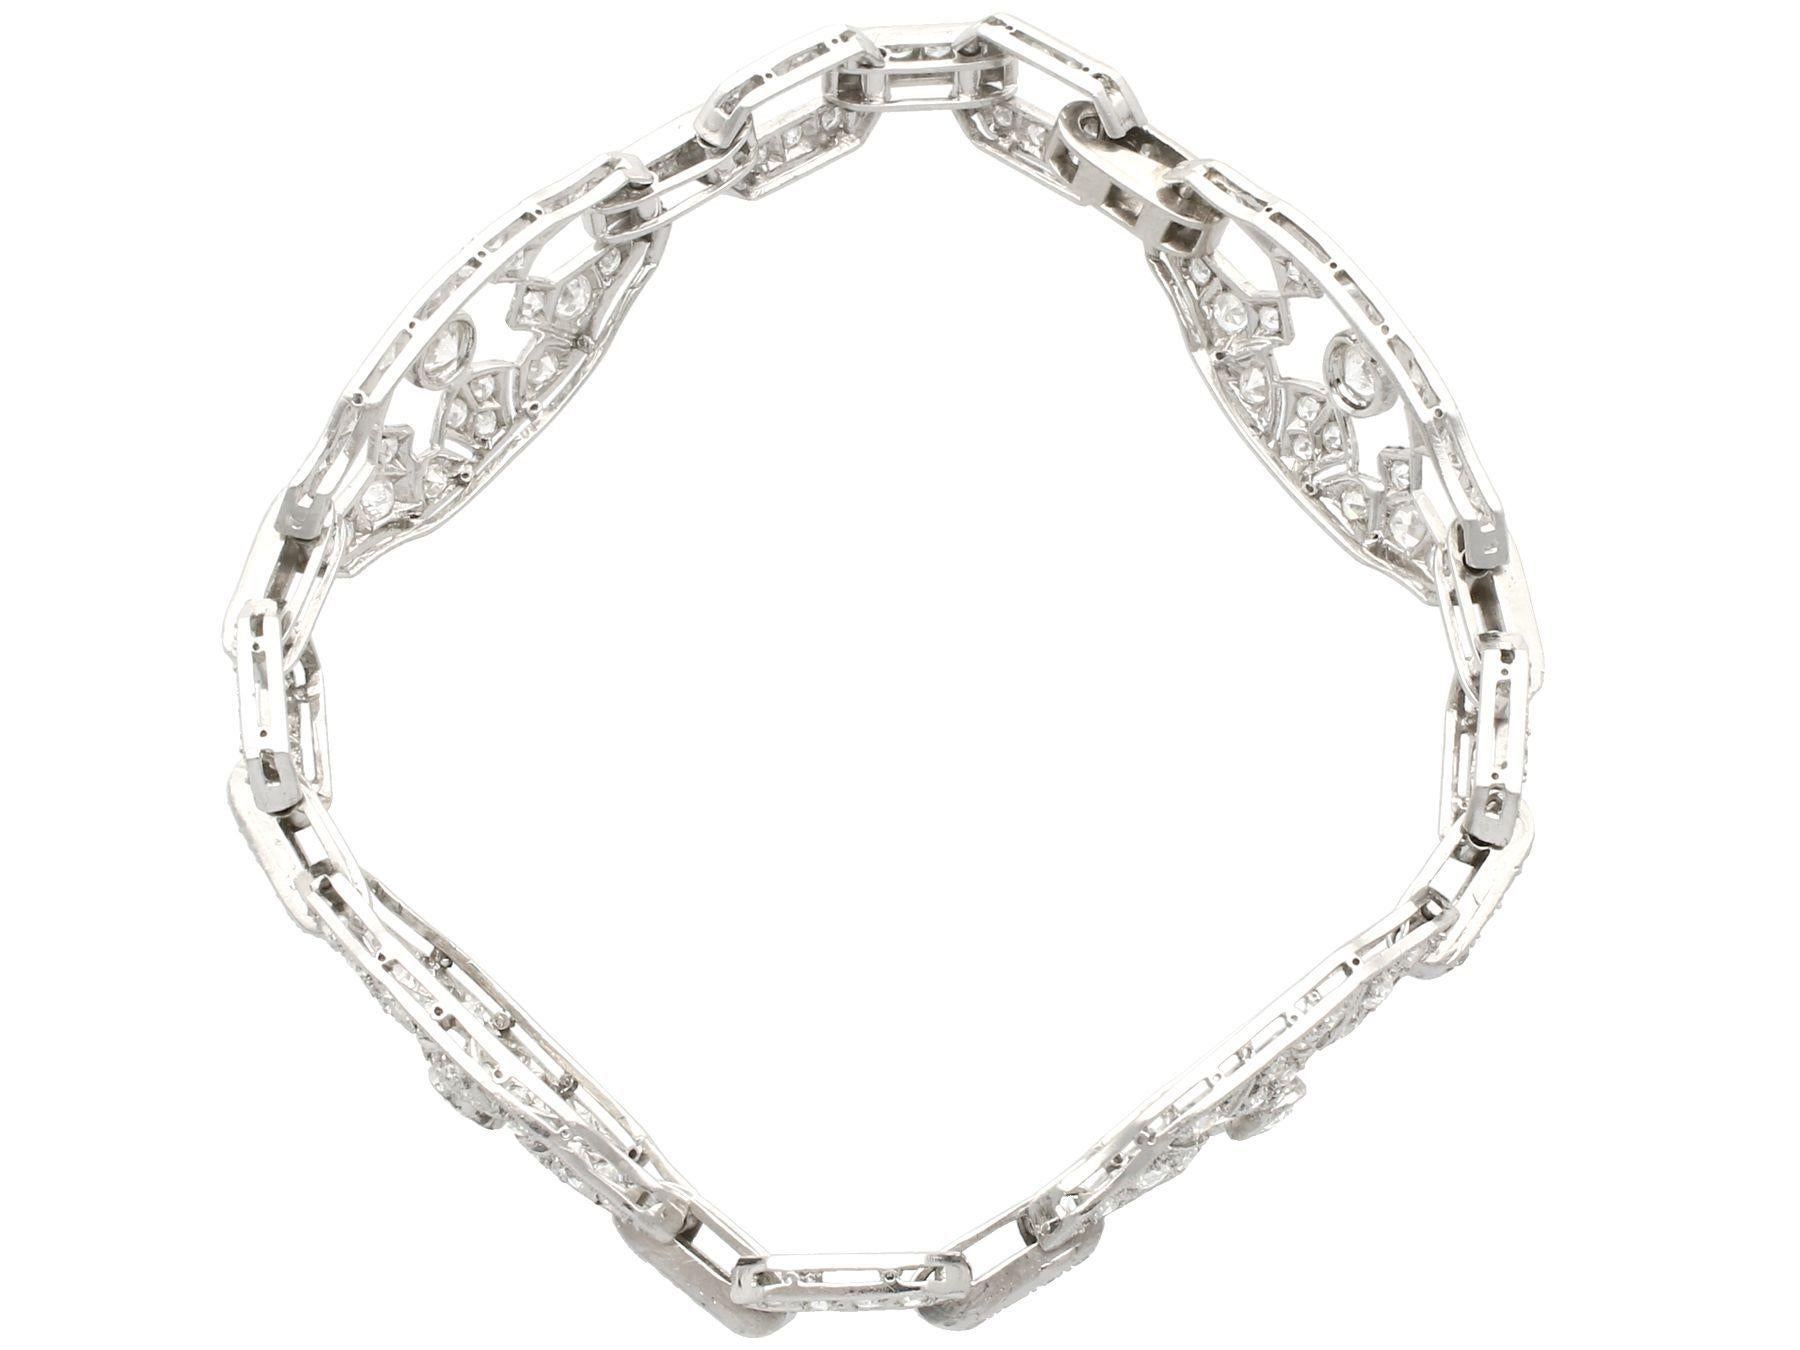 A stunning antique Art Deco 5.88 carat diamond and platinum bracelet with presentation case; part of our diverse antique estate jewelry collections.

This stunning, fine and impressive Art Deco antique diamond bracelet has been crafted in